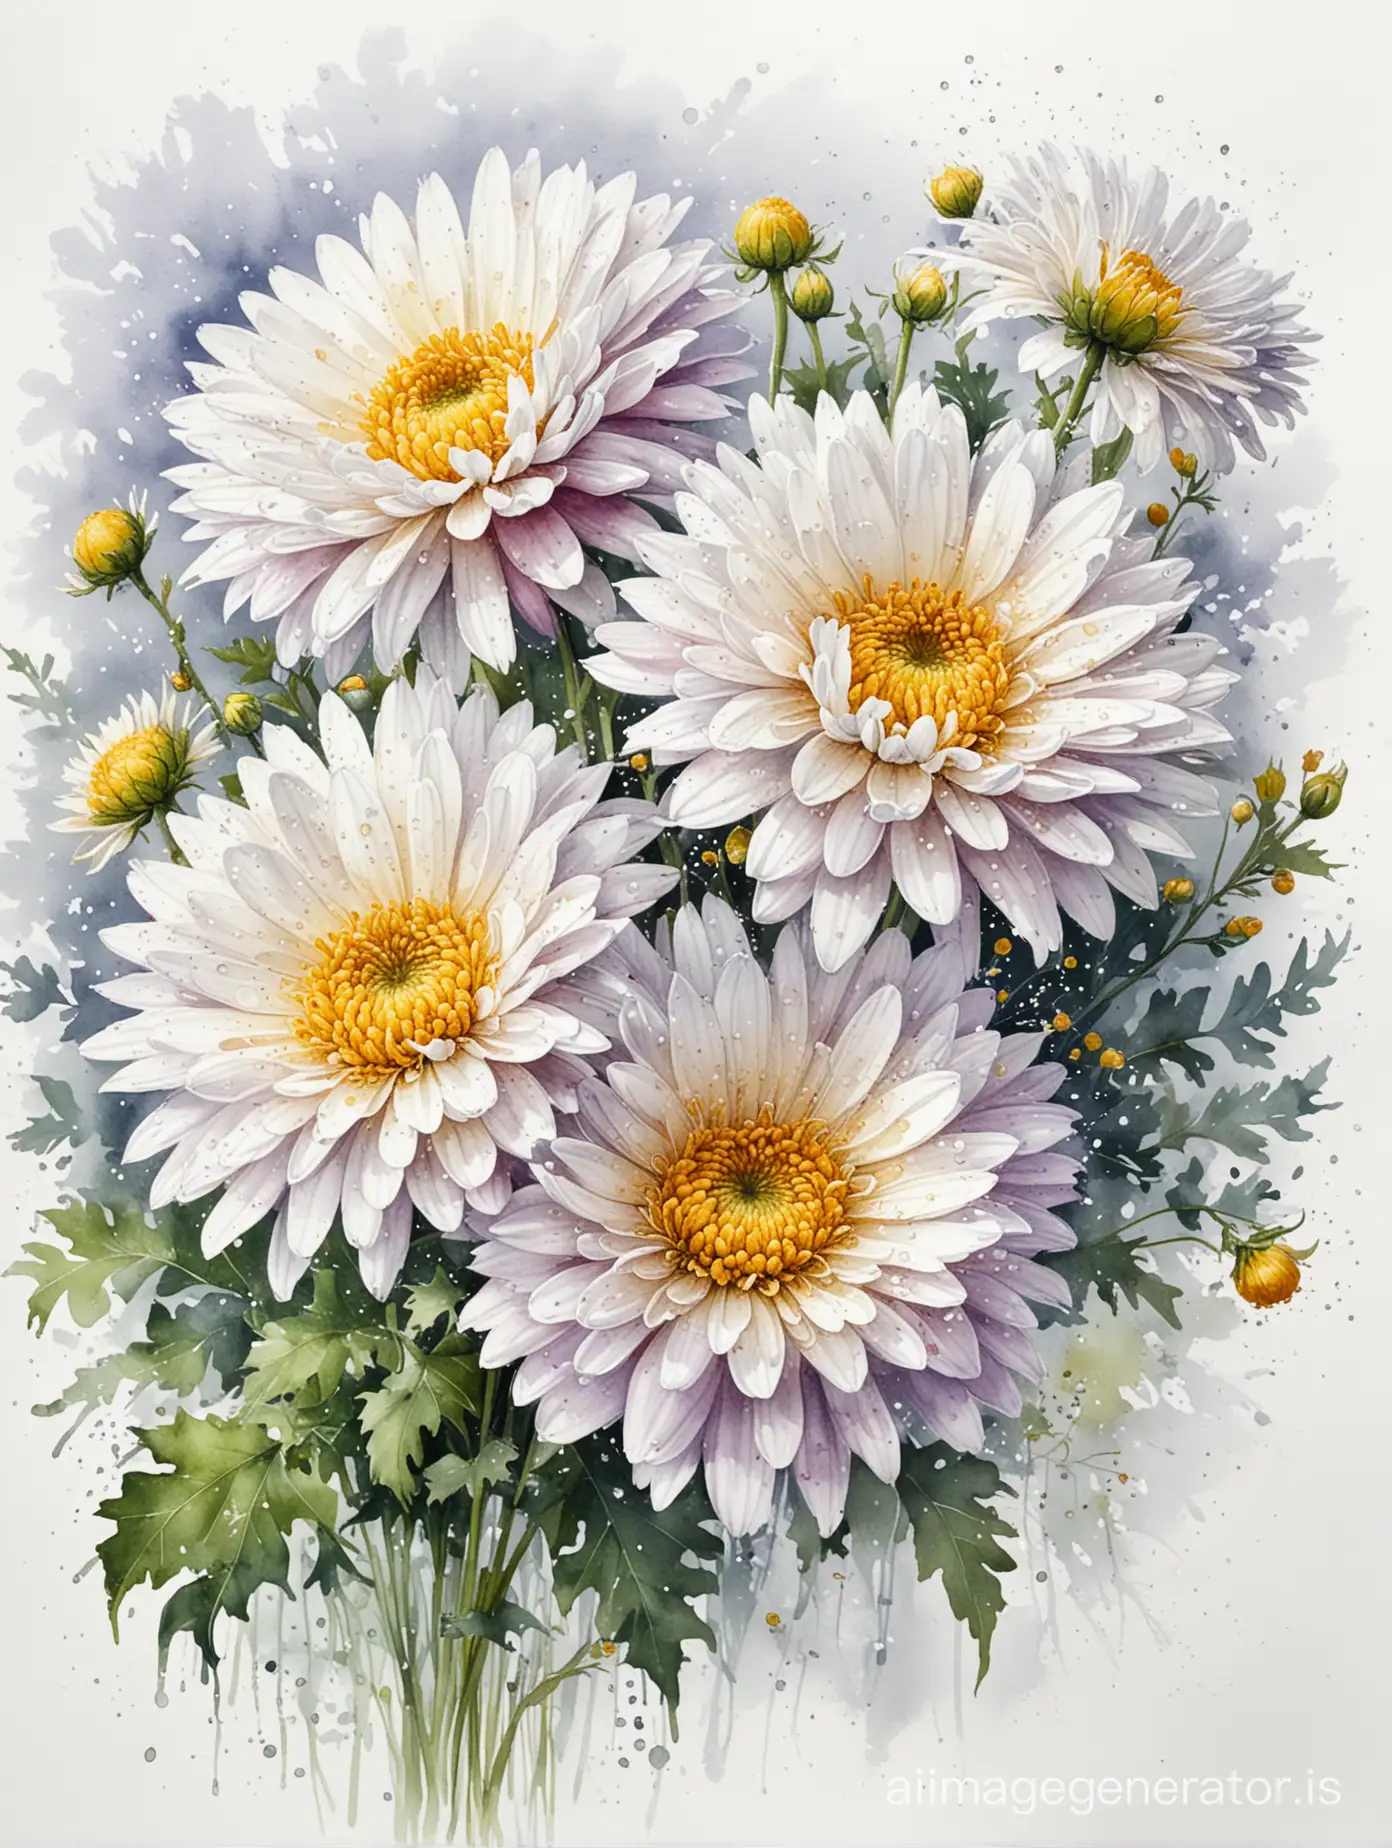 Watercolour. A gorgeous bouquet of chrysanthemums with dew drops on a white background